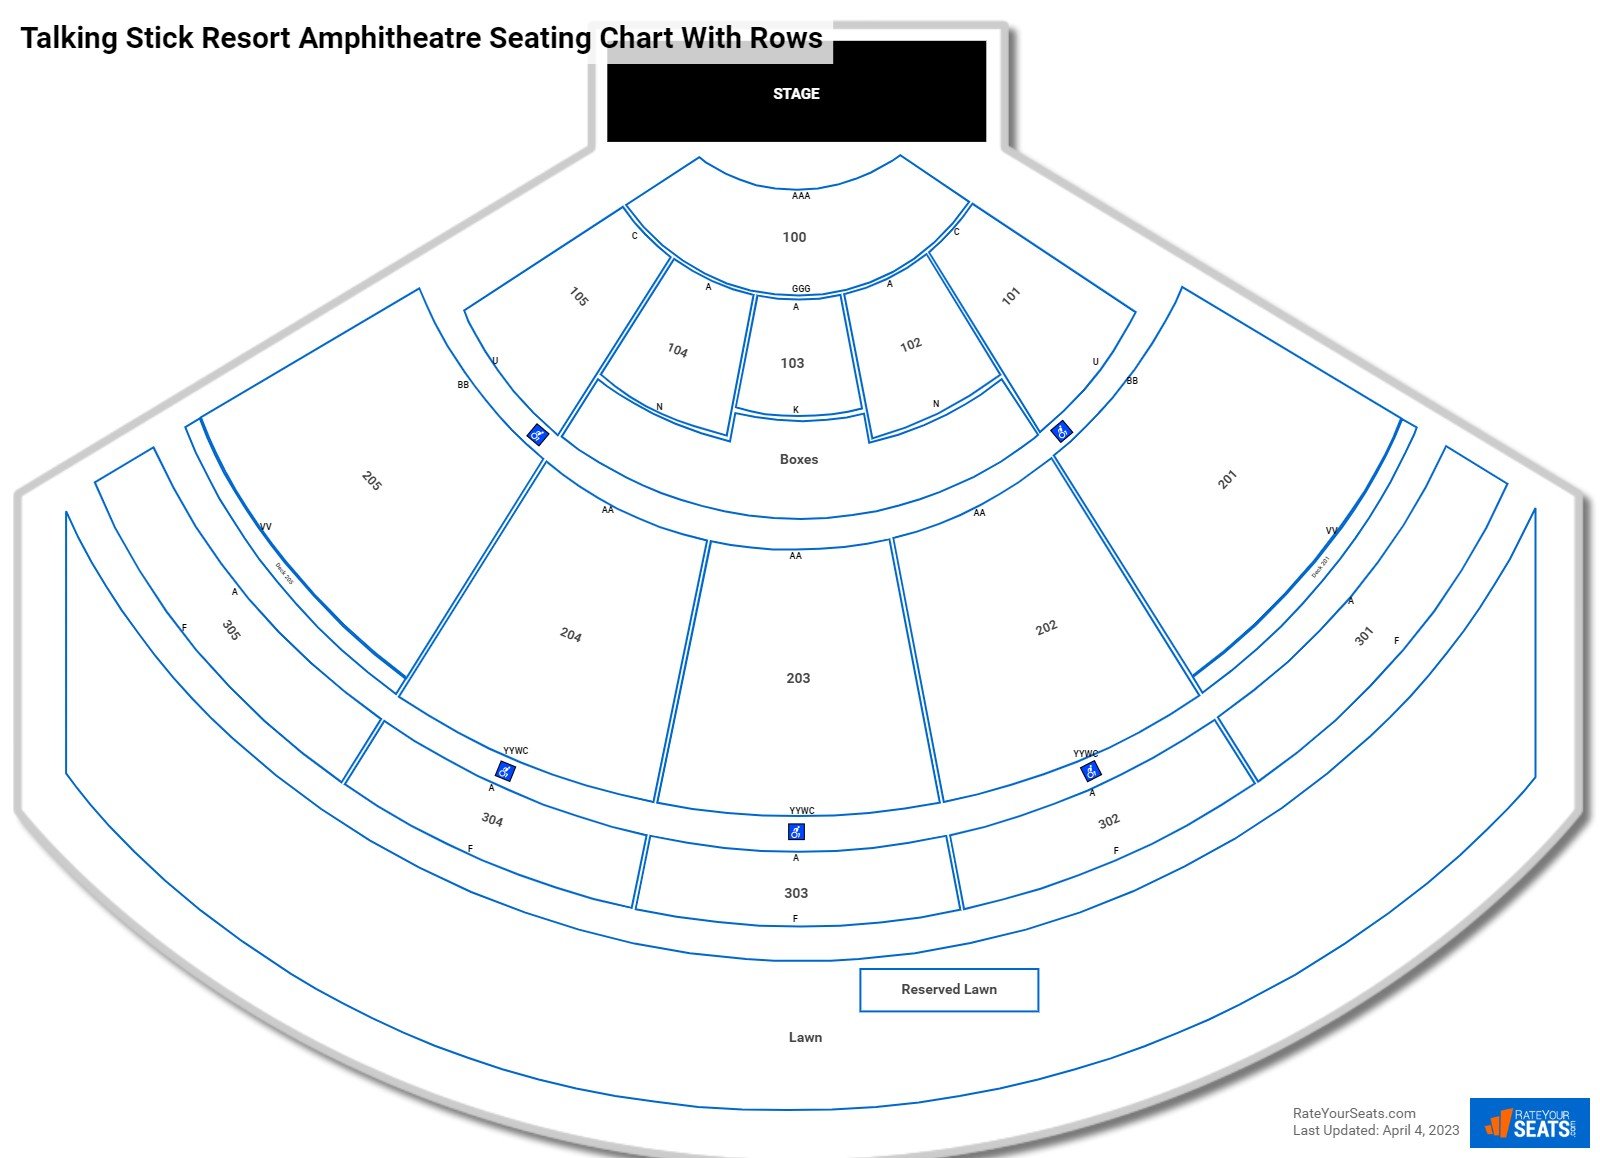 Ak-Chin Pavilion seating chart with row numbers